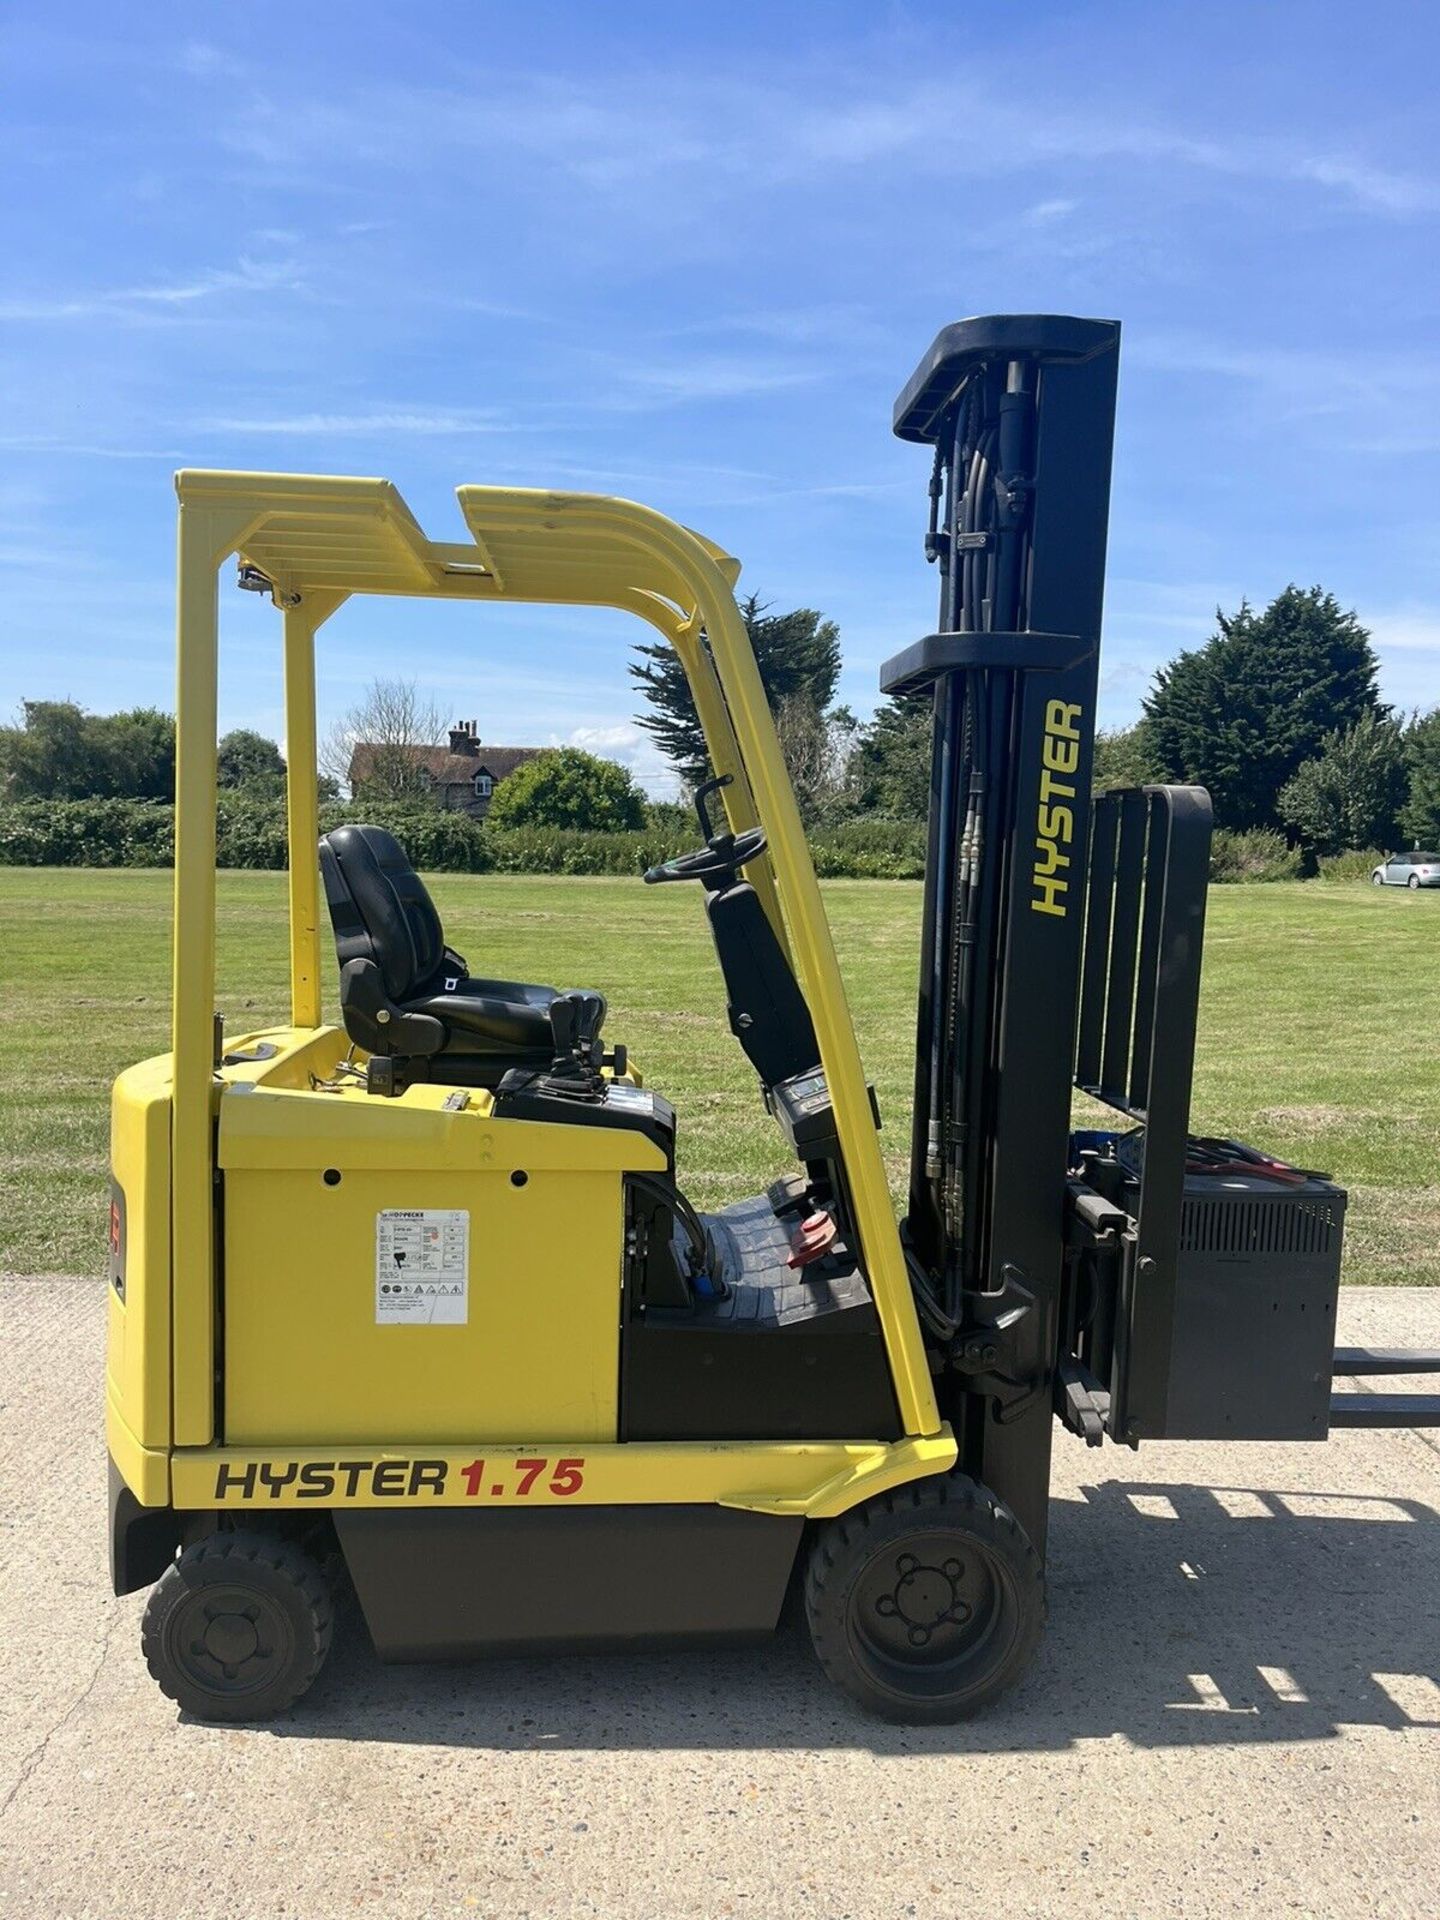 HYSTER, 1.75 Ton Electric Forklift Truck - Image 2 of 6